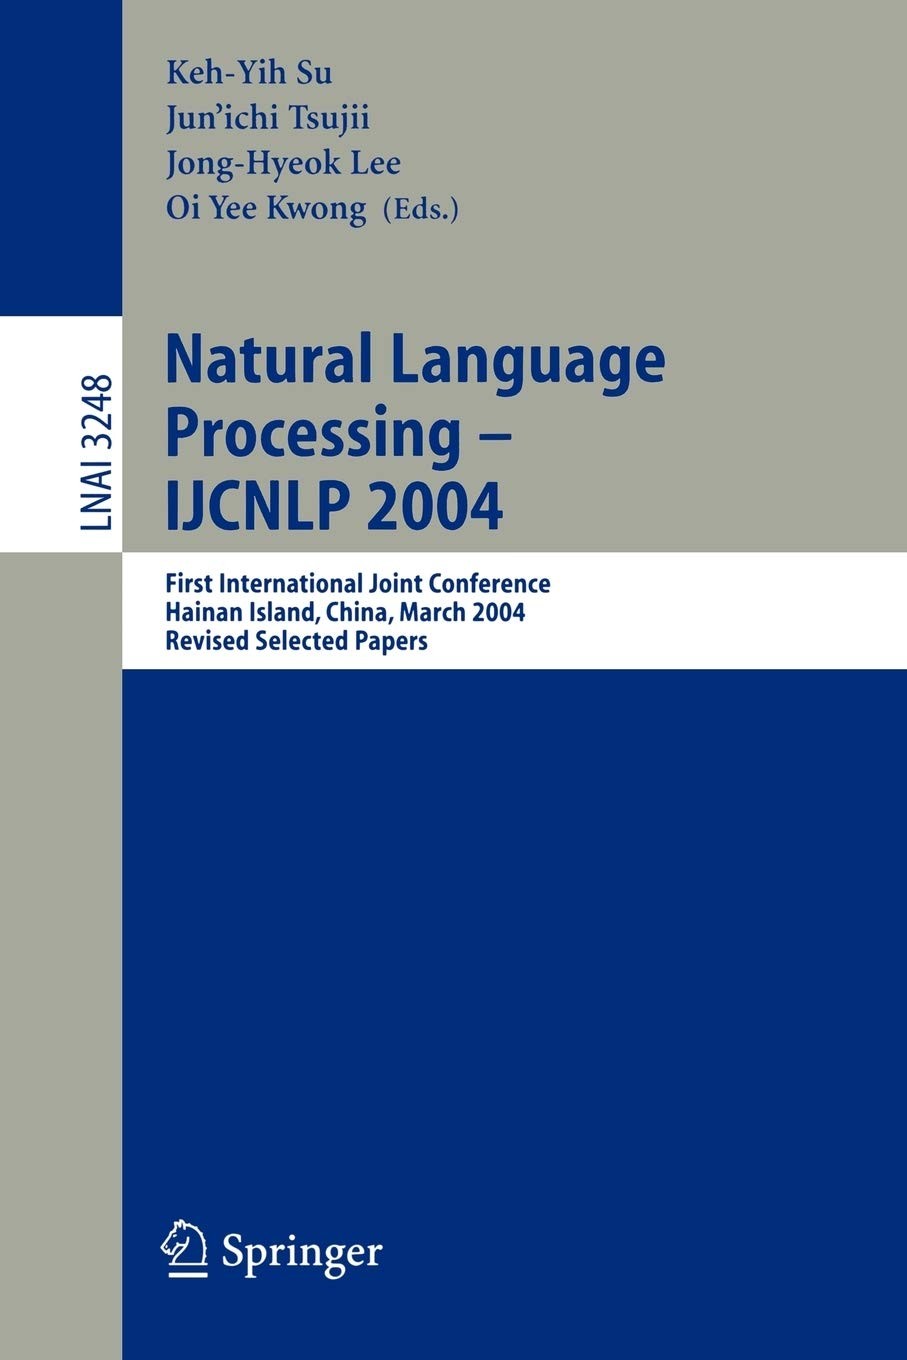 Natural Language Processing – IJCNLP 2004: First International Joint Conference, Hainan Island, China, March 22-24, 2004, Revised Selected Papers